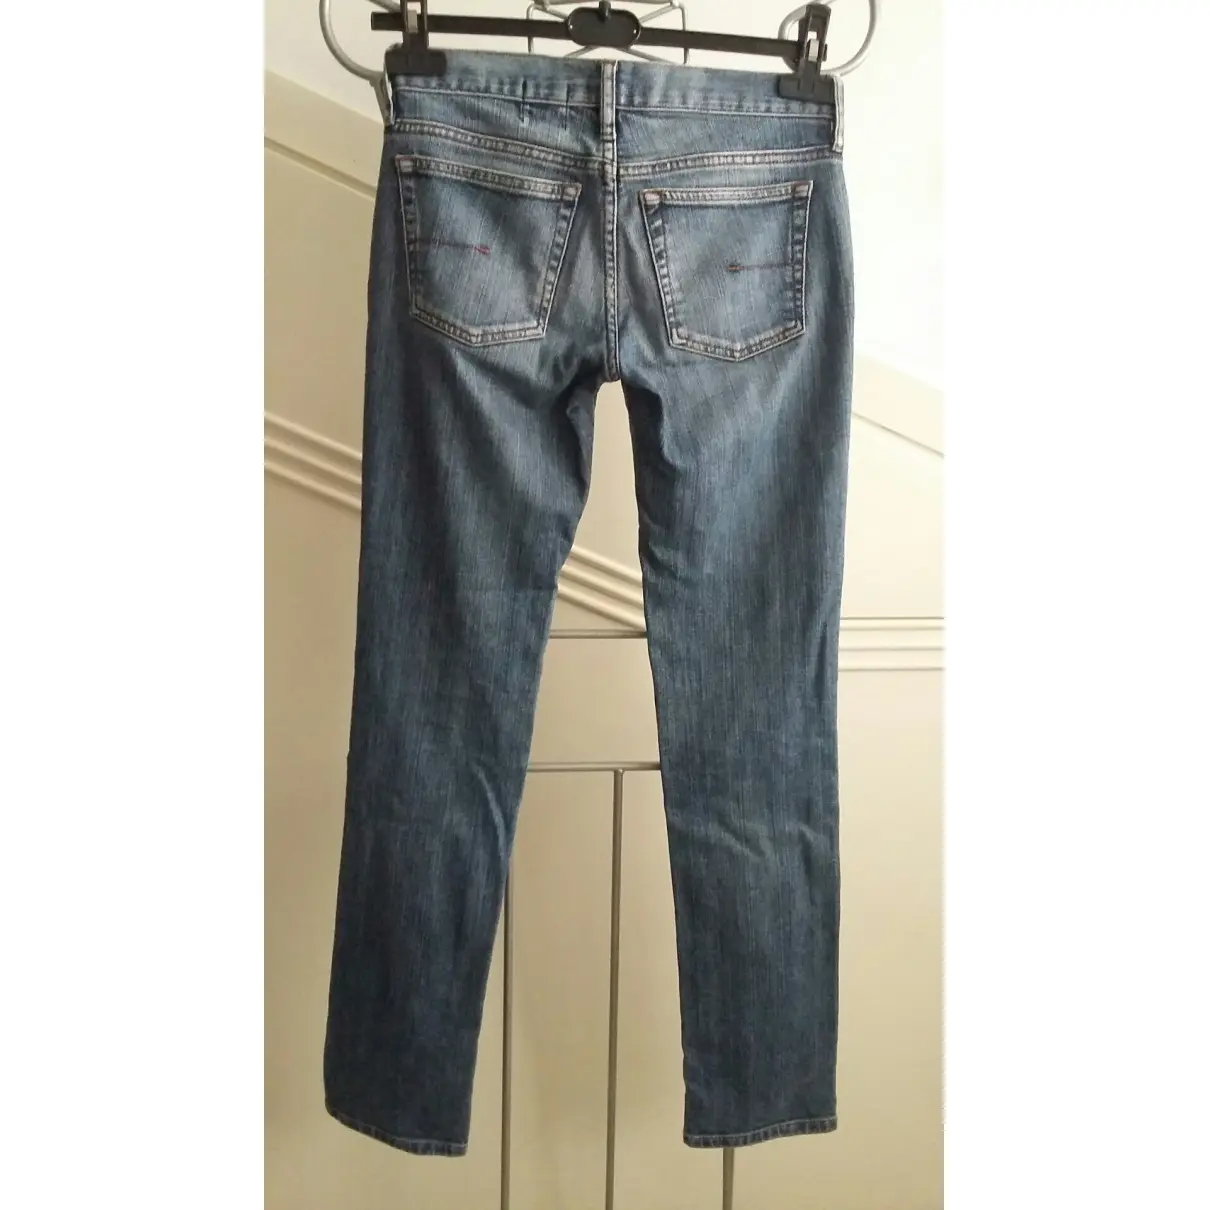 Mauro Grifoni Straight jeans for sale